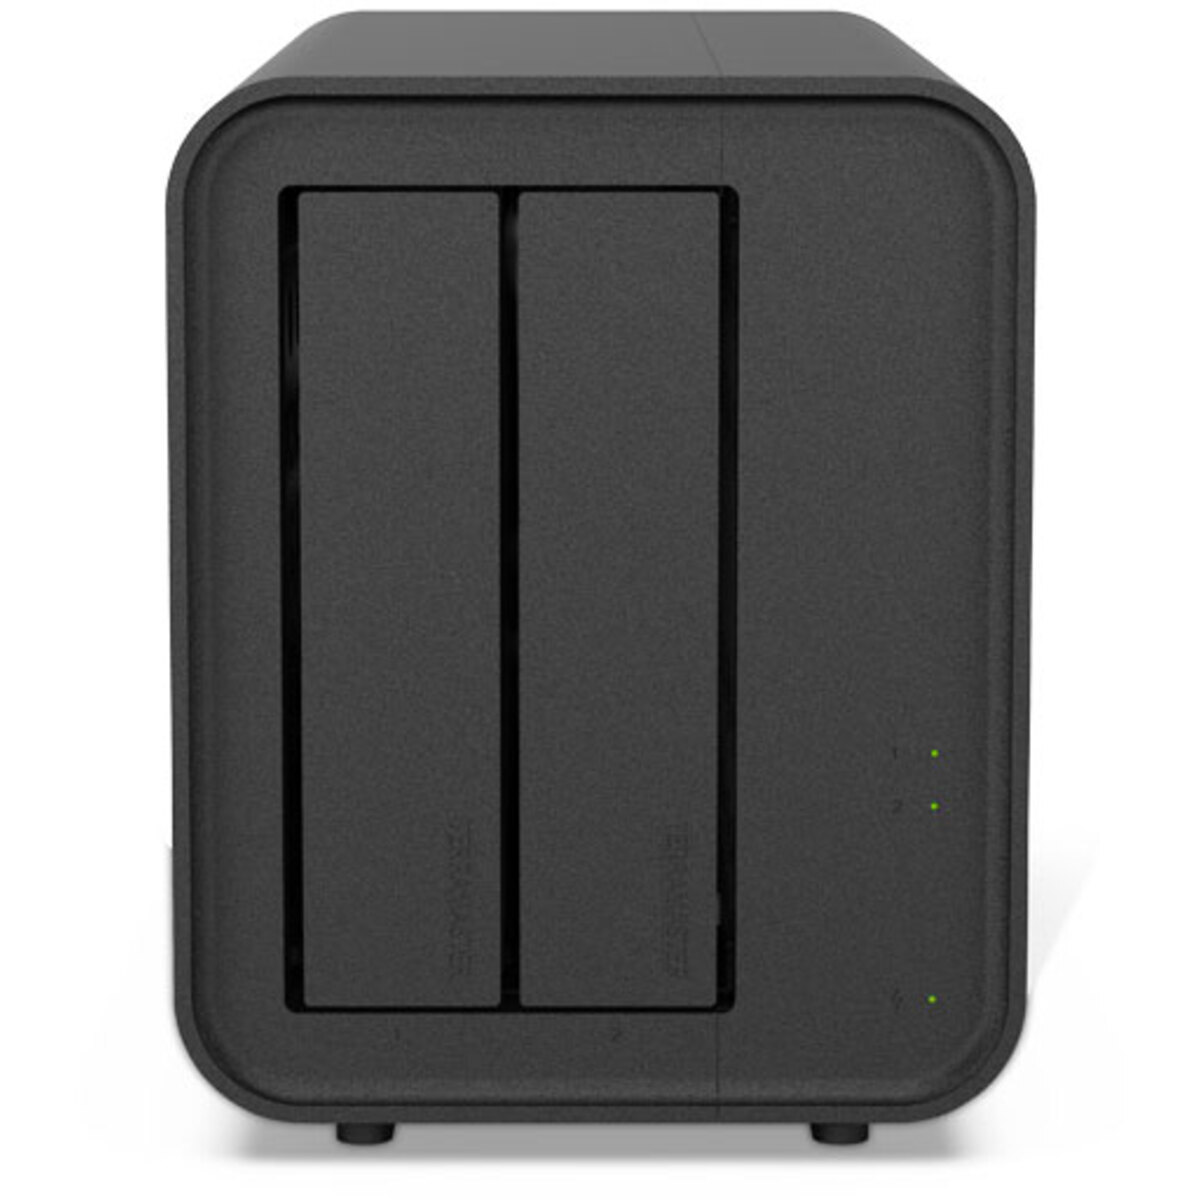 TerraMaster F2-424 2tb 2-Bay Desktop Multimedia / Power User / Business NAS - Network Attached Storage Device 1x2tb Crucial MX500 CT2000MX500SSD1 2.5 560/510MB/s SATA 6Gb/s SSD CONSUMER Class Drives Installed - Burn-In Tested F2-424